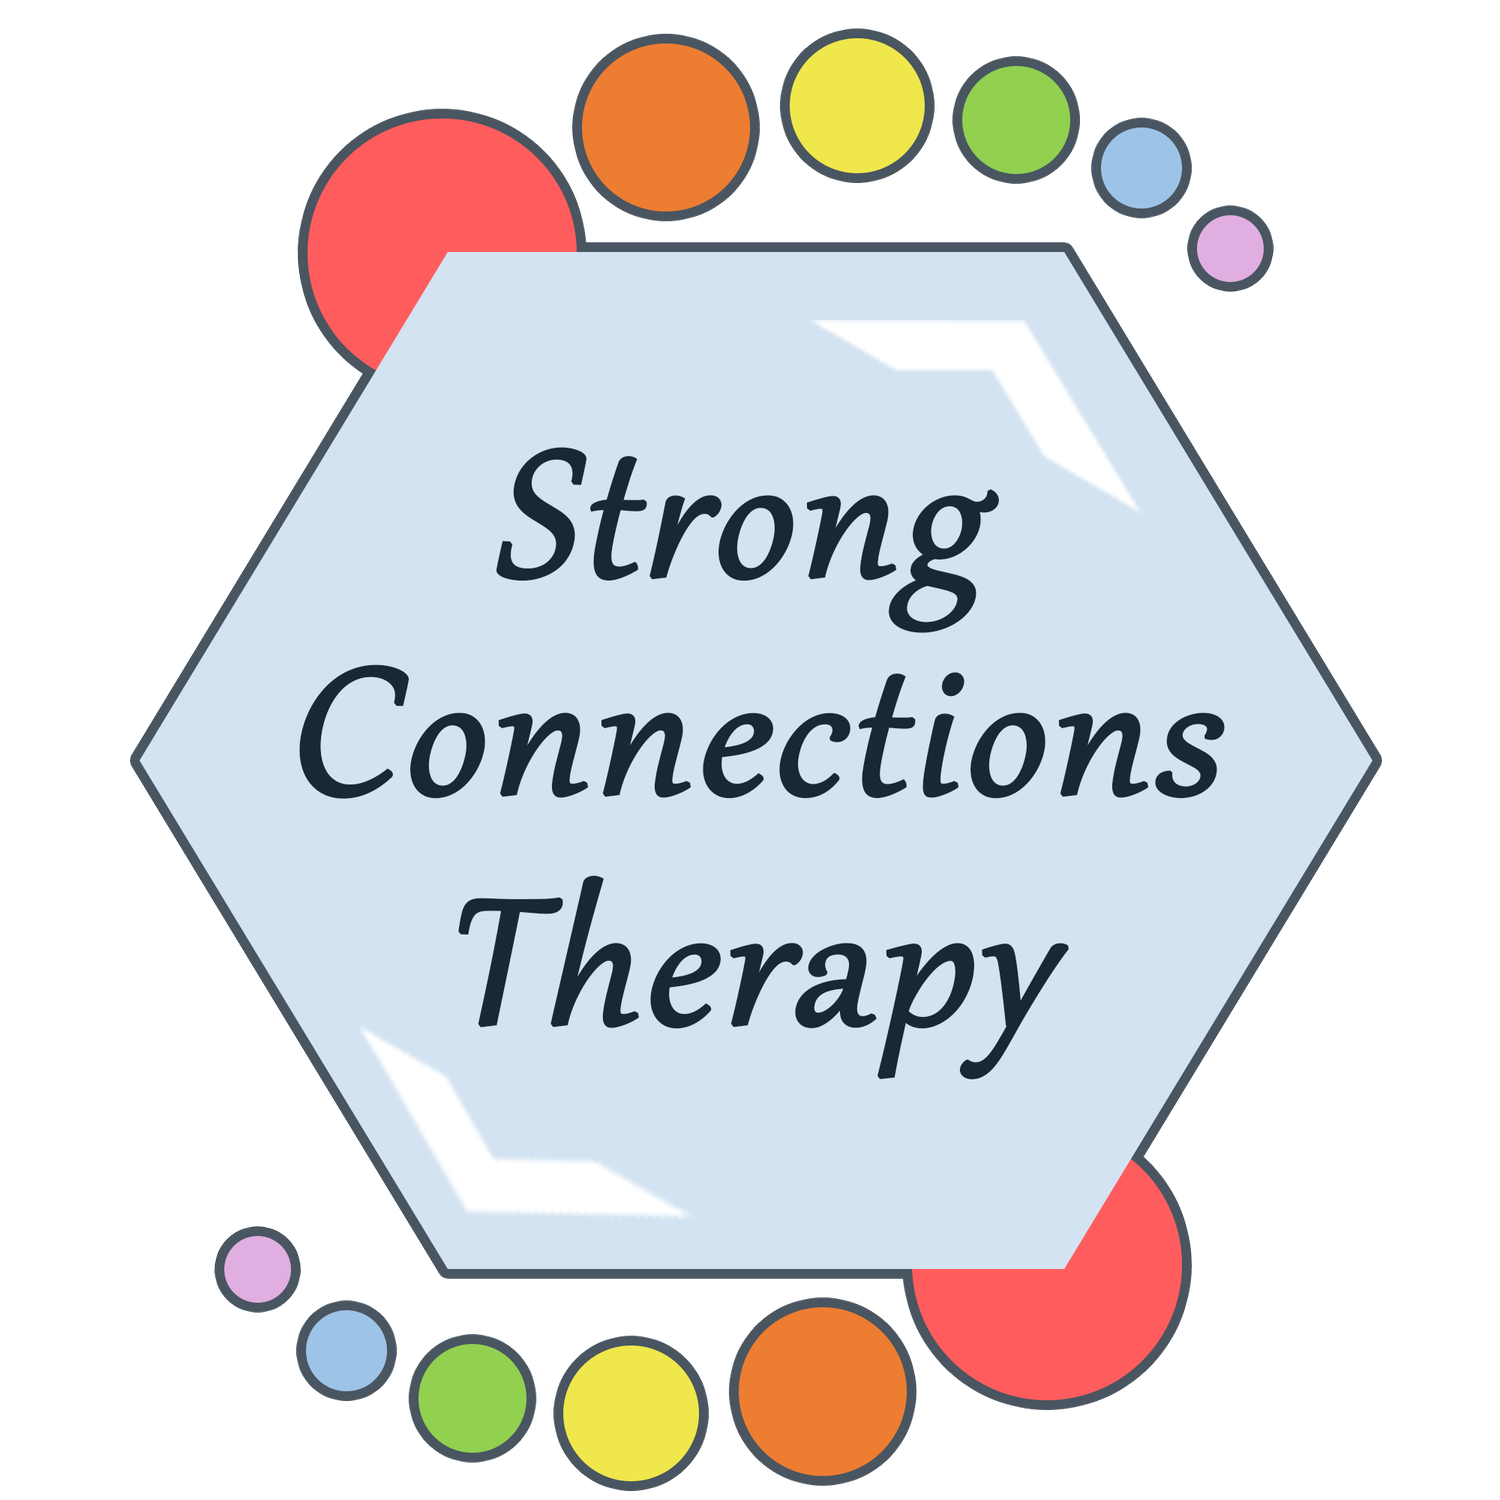 Strong Connections Therapy